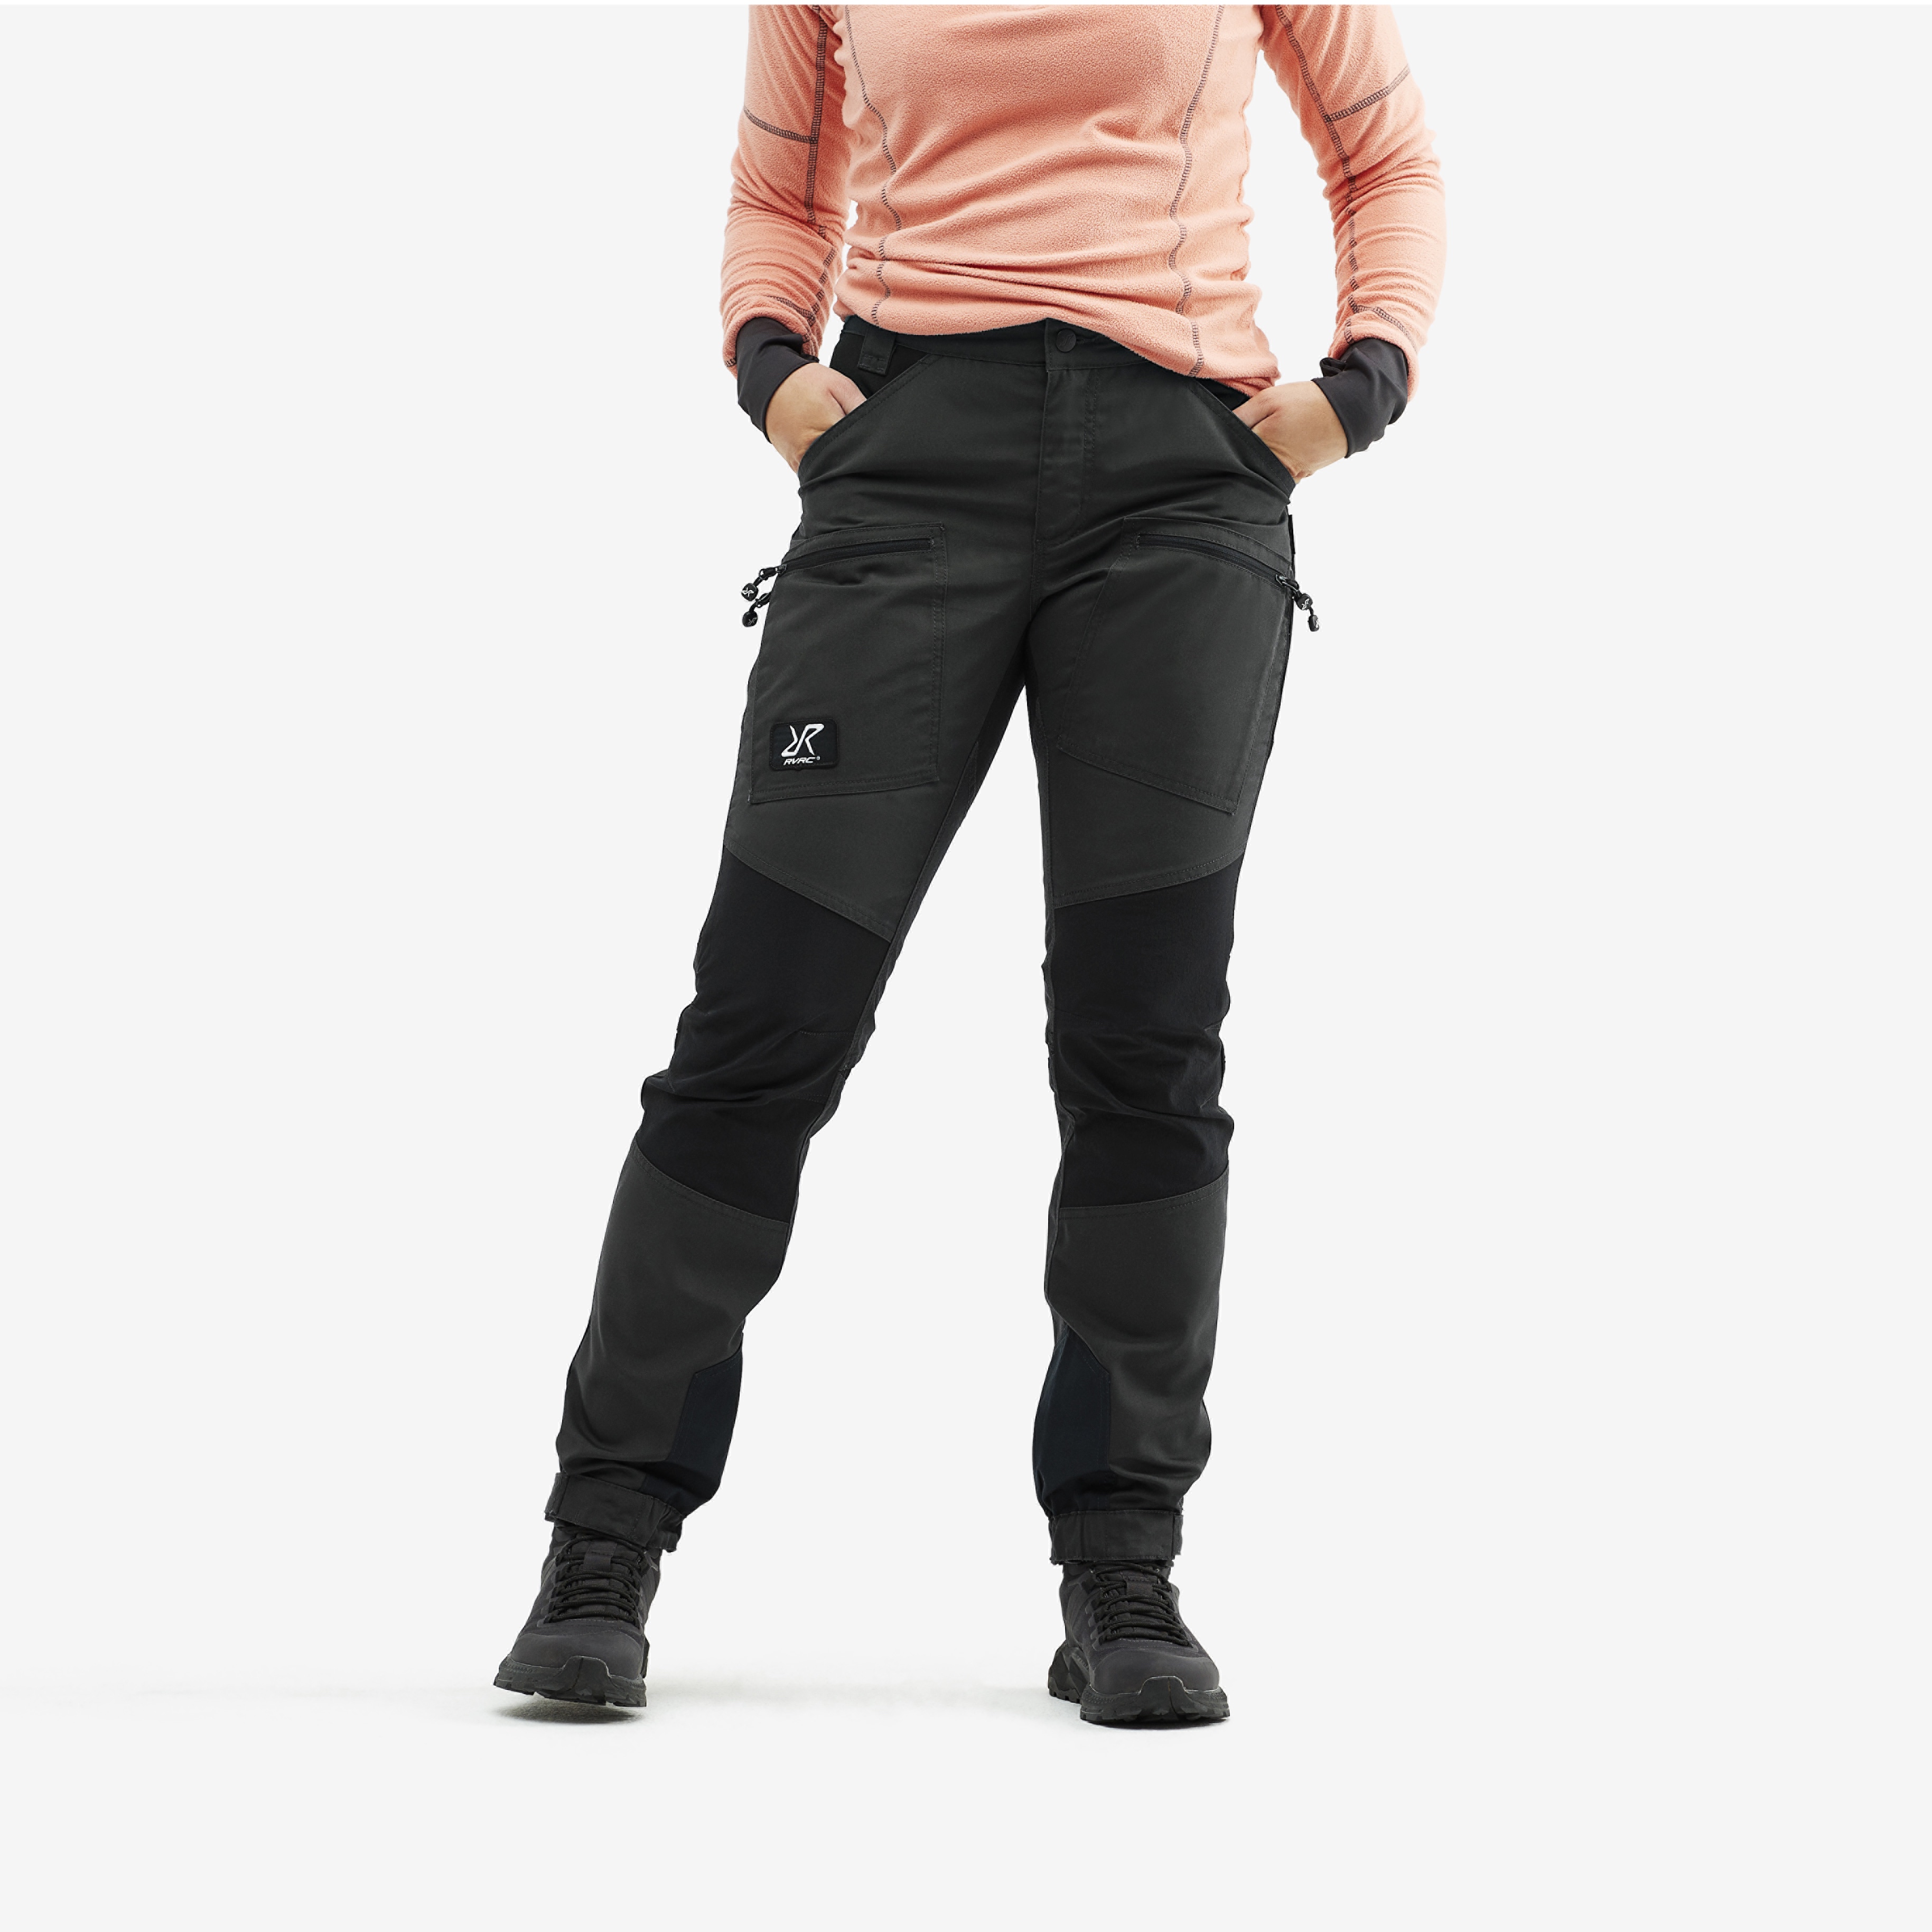 Walking trousers for women with short length